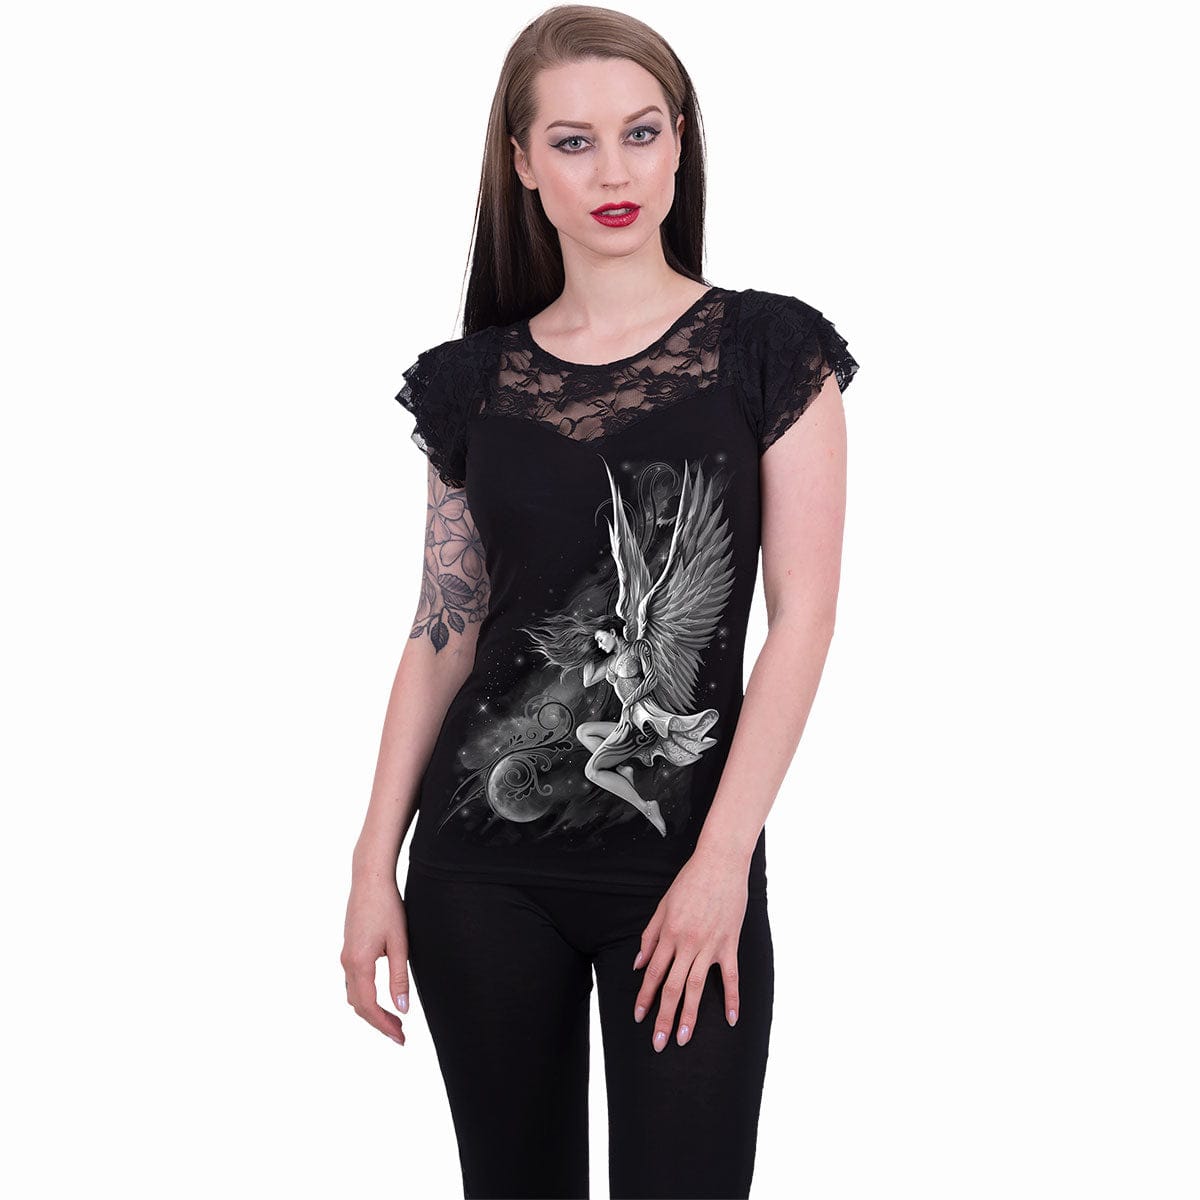 LUCID DREAMS - Lace Layered Cap Sleeve Top Black - Spiral USA